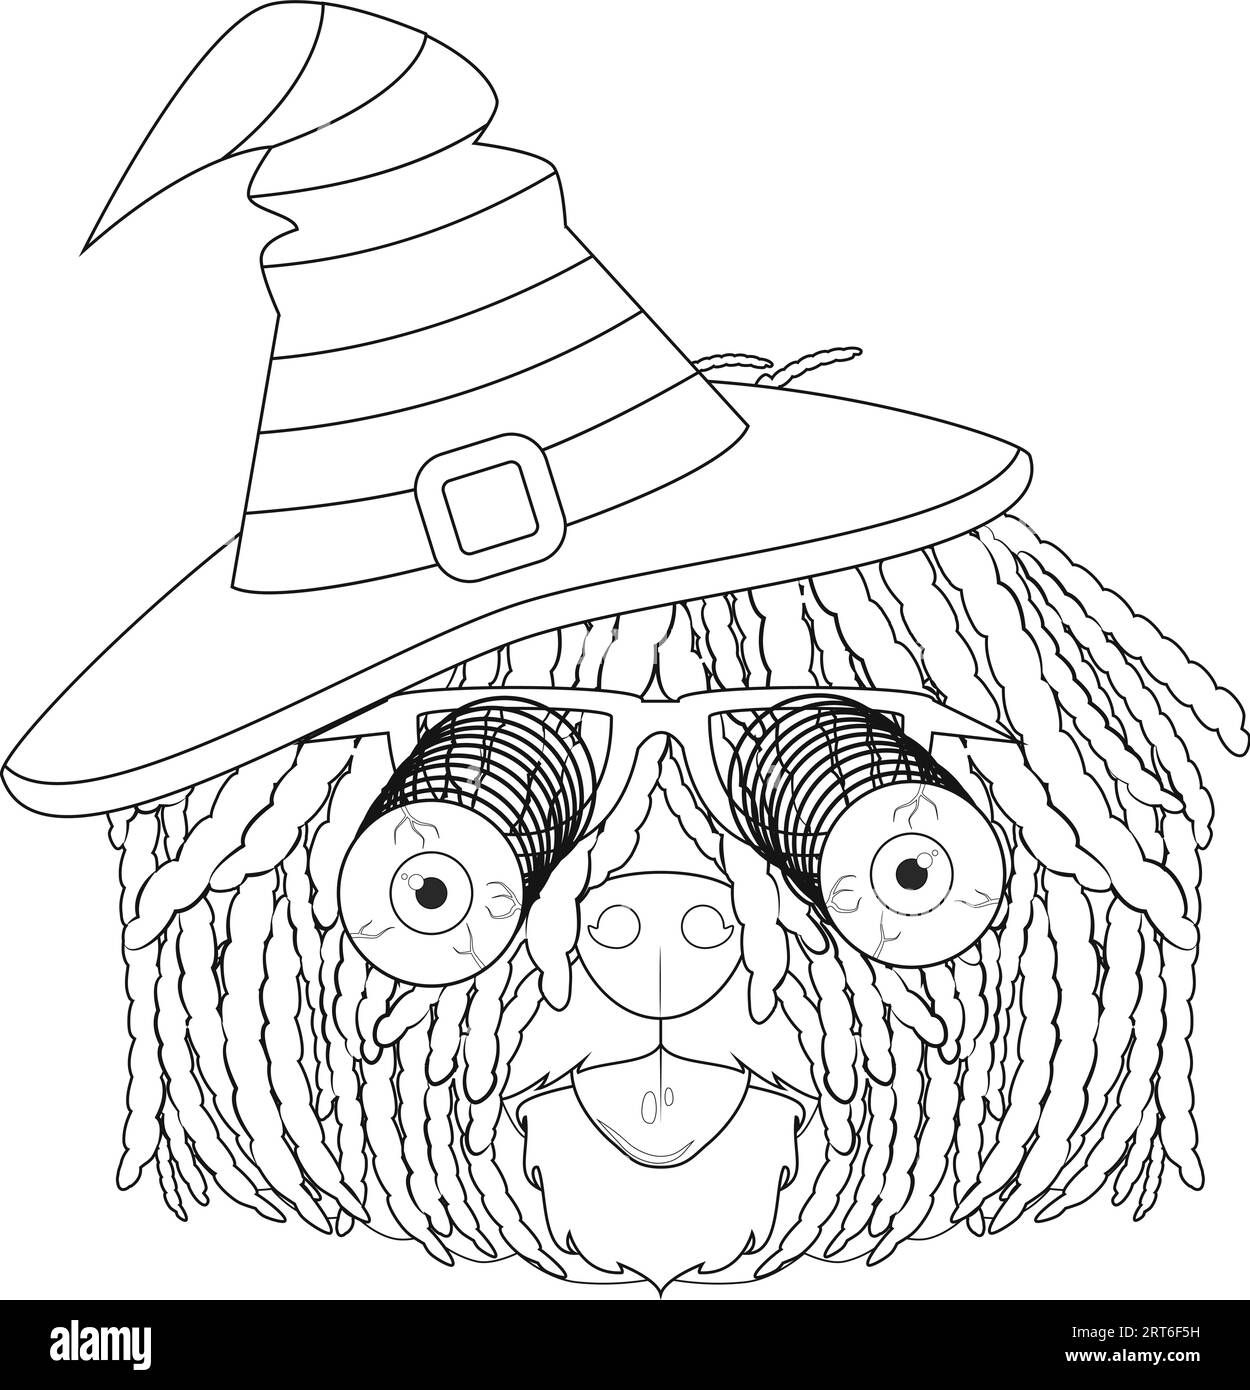 https://c8.alamy.com/comp/2RT6F5H/halloween-greeting-card-for-coloring-puli-dog-dressed-as-a-witch-with-black-and-green-hat-and-glasses-with-terrifying-googly-eyes-2RT6F5H.jpg